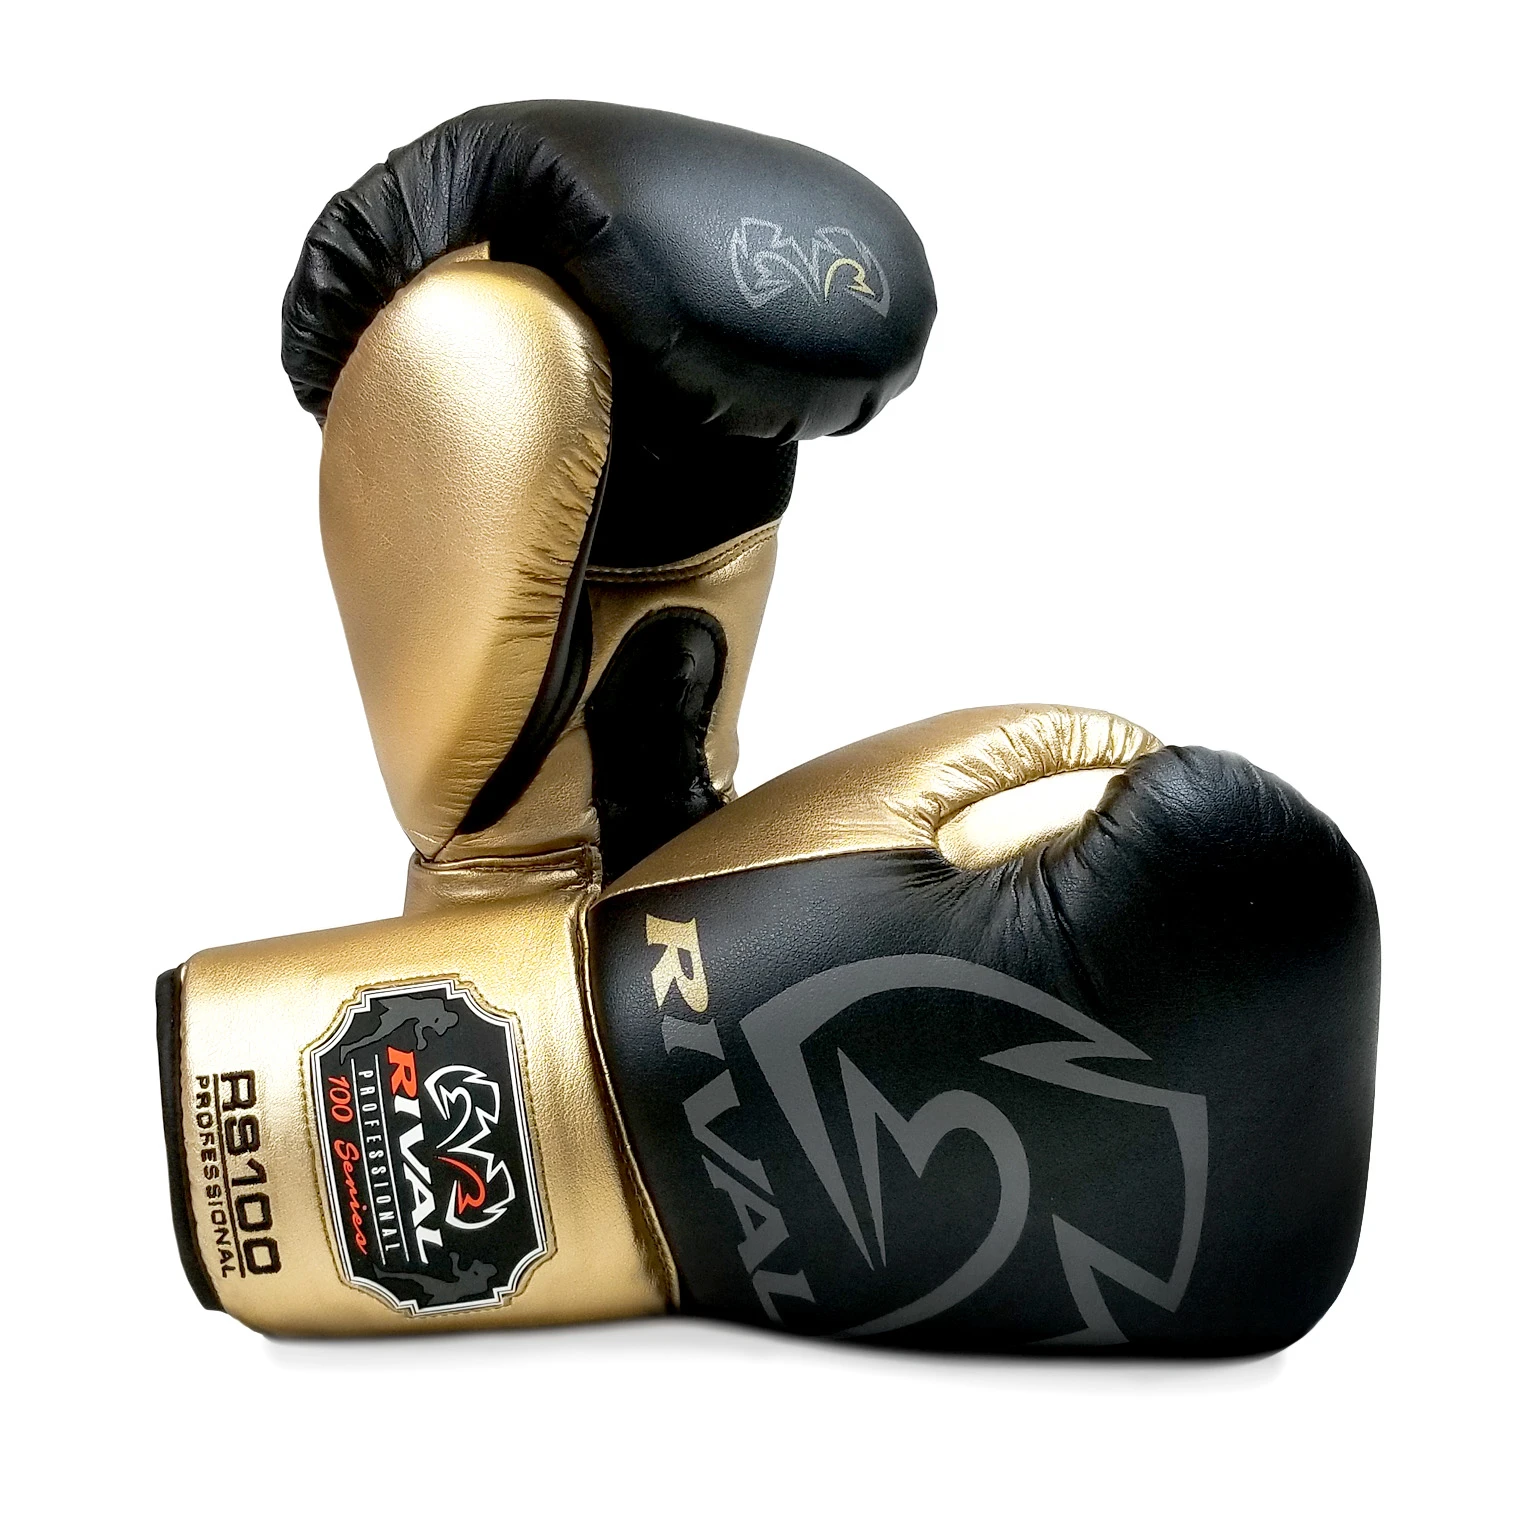 RIVAL: RS100 PROFESSIONAL SPARRING BOXING GLOVES - BLACK/GOLD